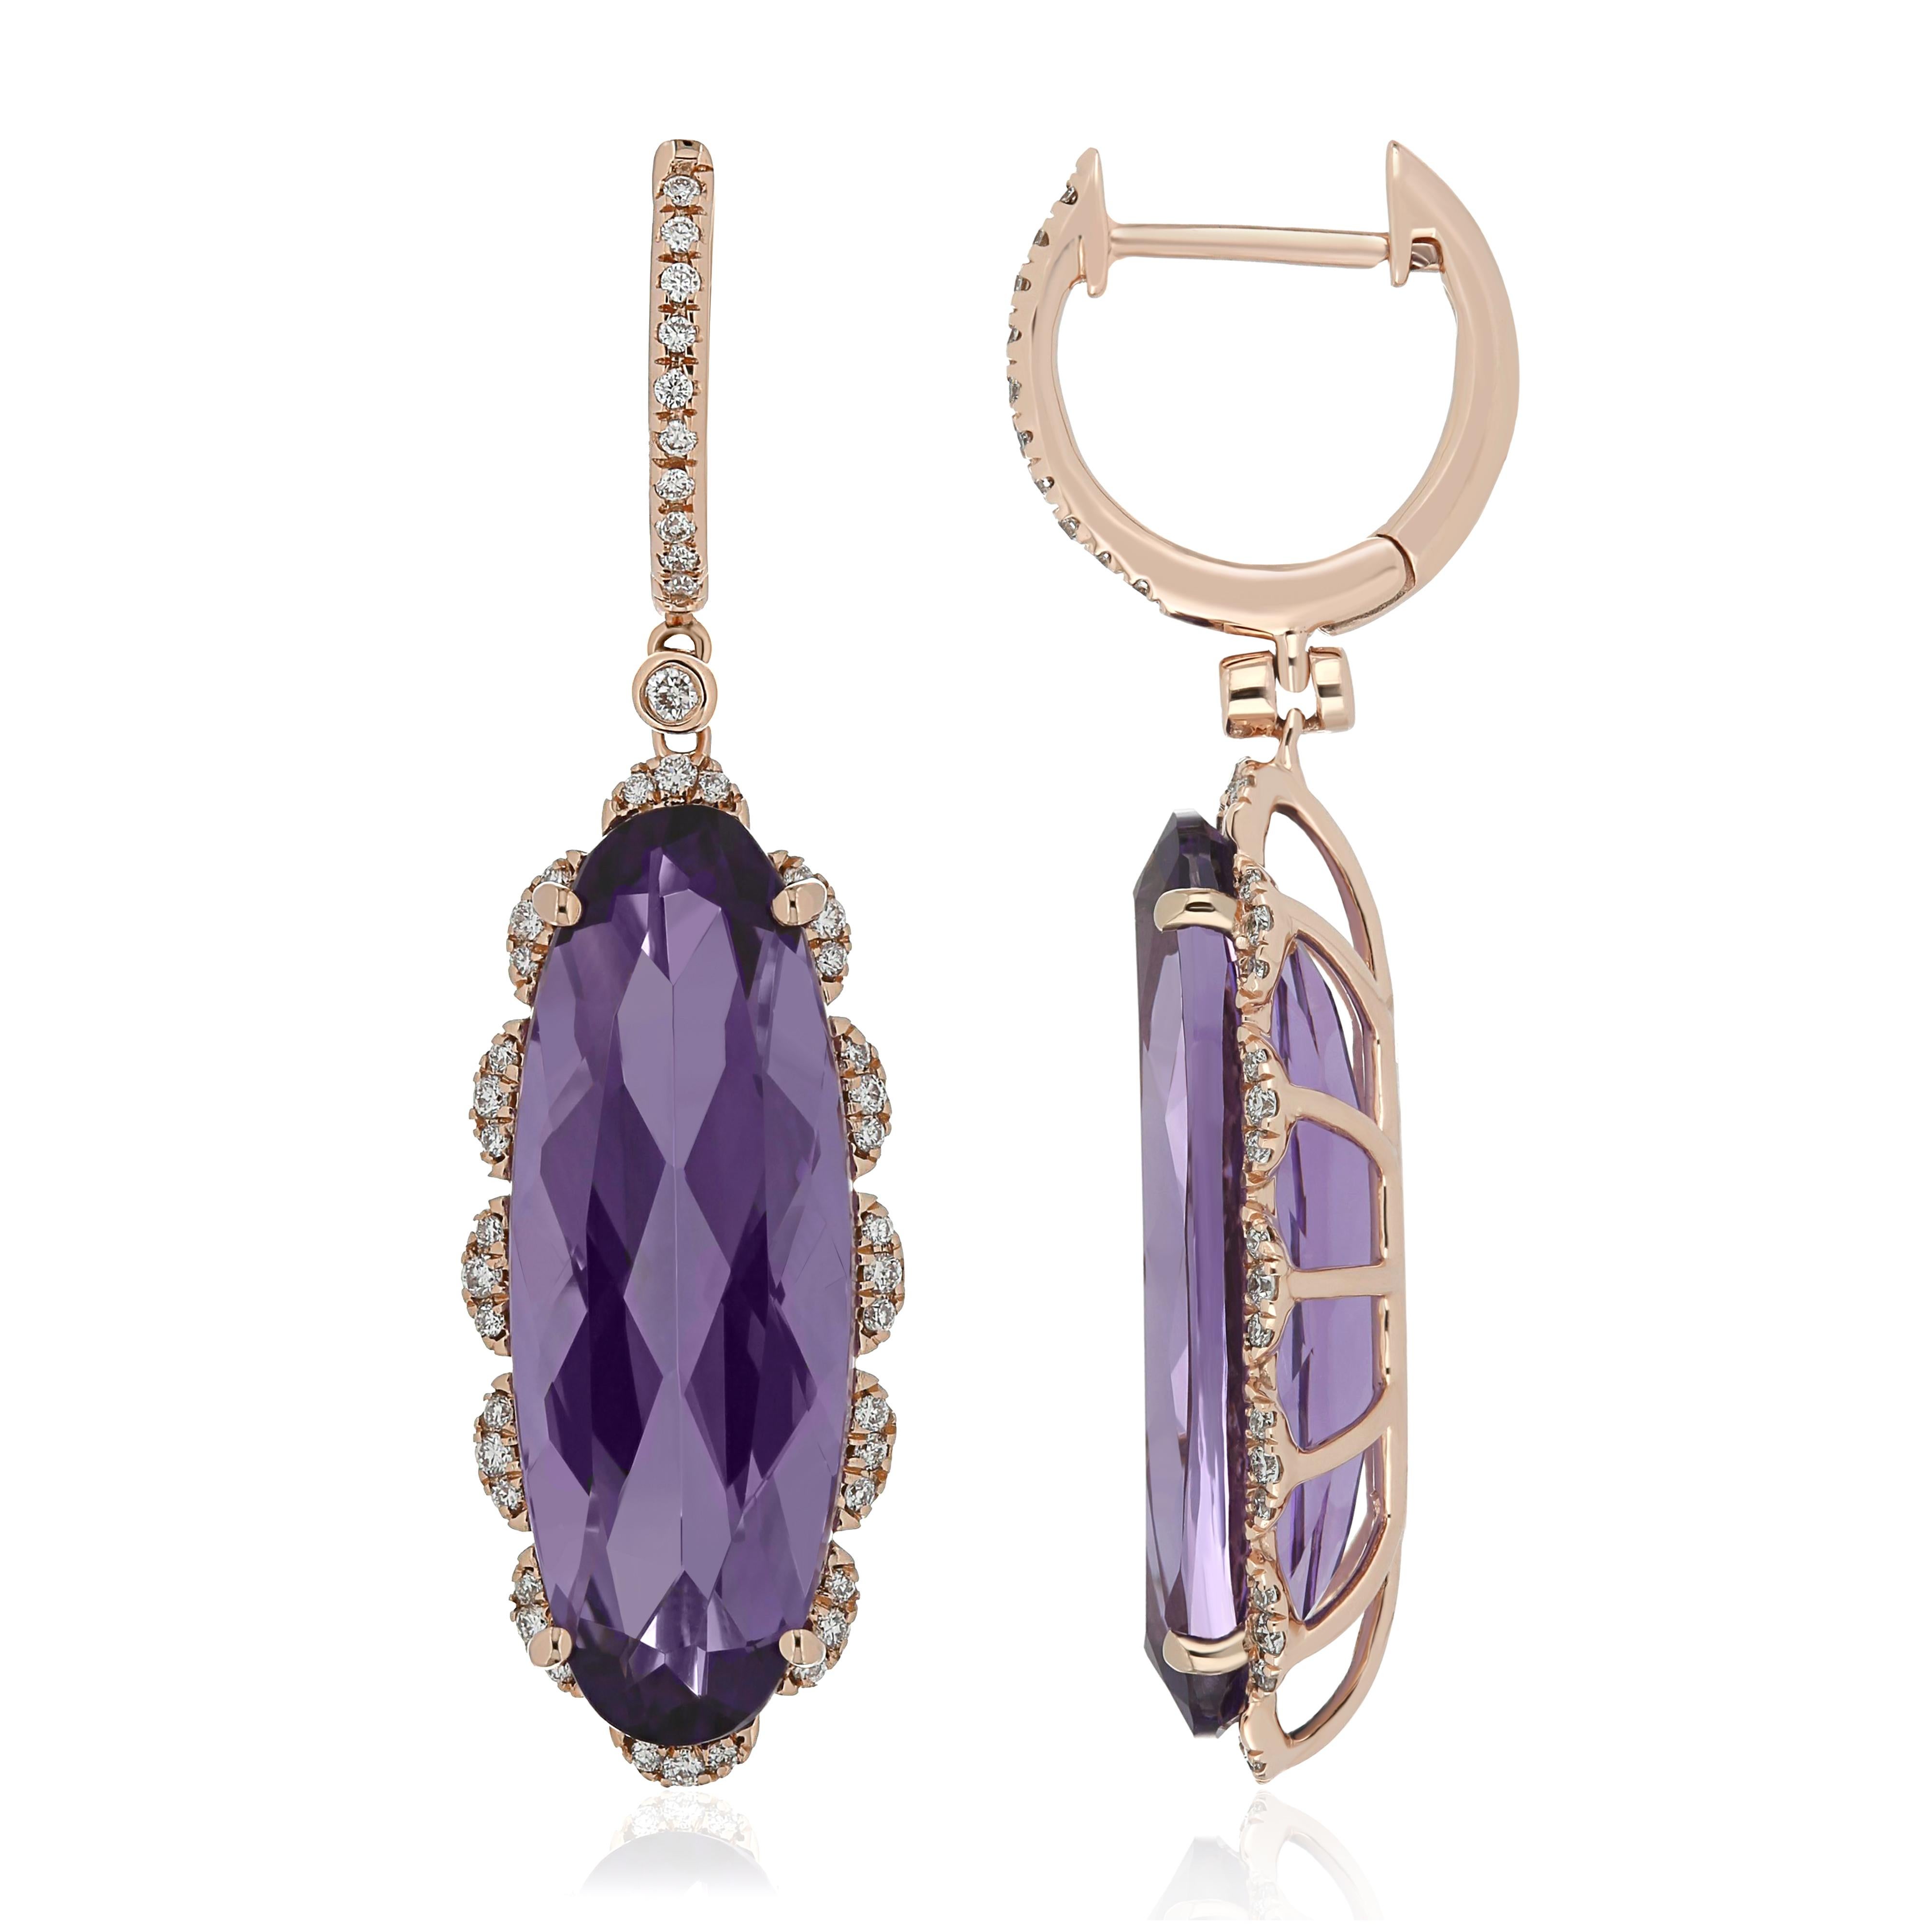 Elegant and exquisitely detailed 14 Karat Rose Gold Earring, center set with 13.05Cts .Oval Shape Amethyst, and micro pave set Diamonds, weighing approx. 0.30 Cts Beautifully Hand crafted in 14 Karat Yellow Gold.

Stone Detail:
Amethyst: